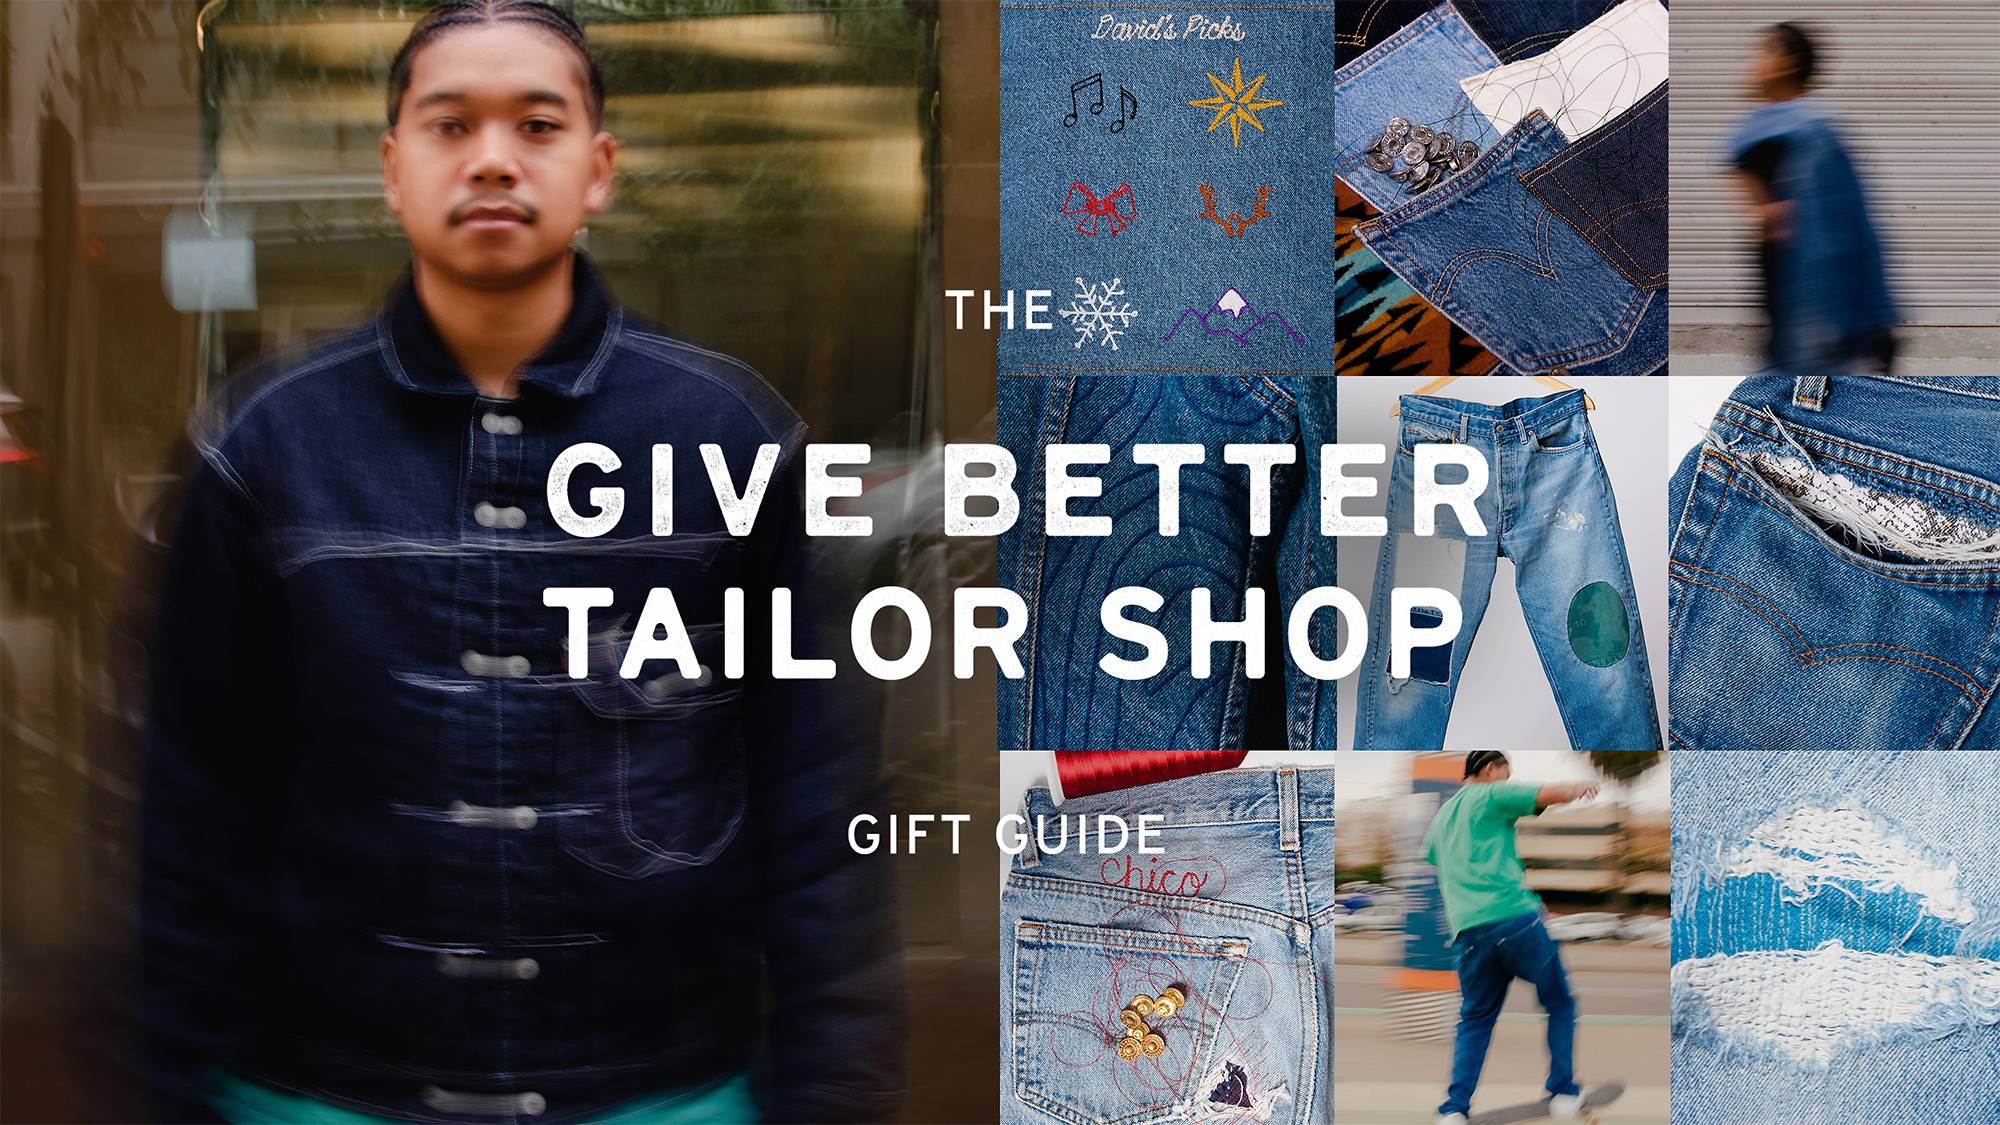 The GIVE BETTER Tailor Shop Gift Guide